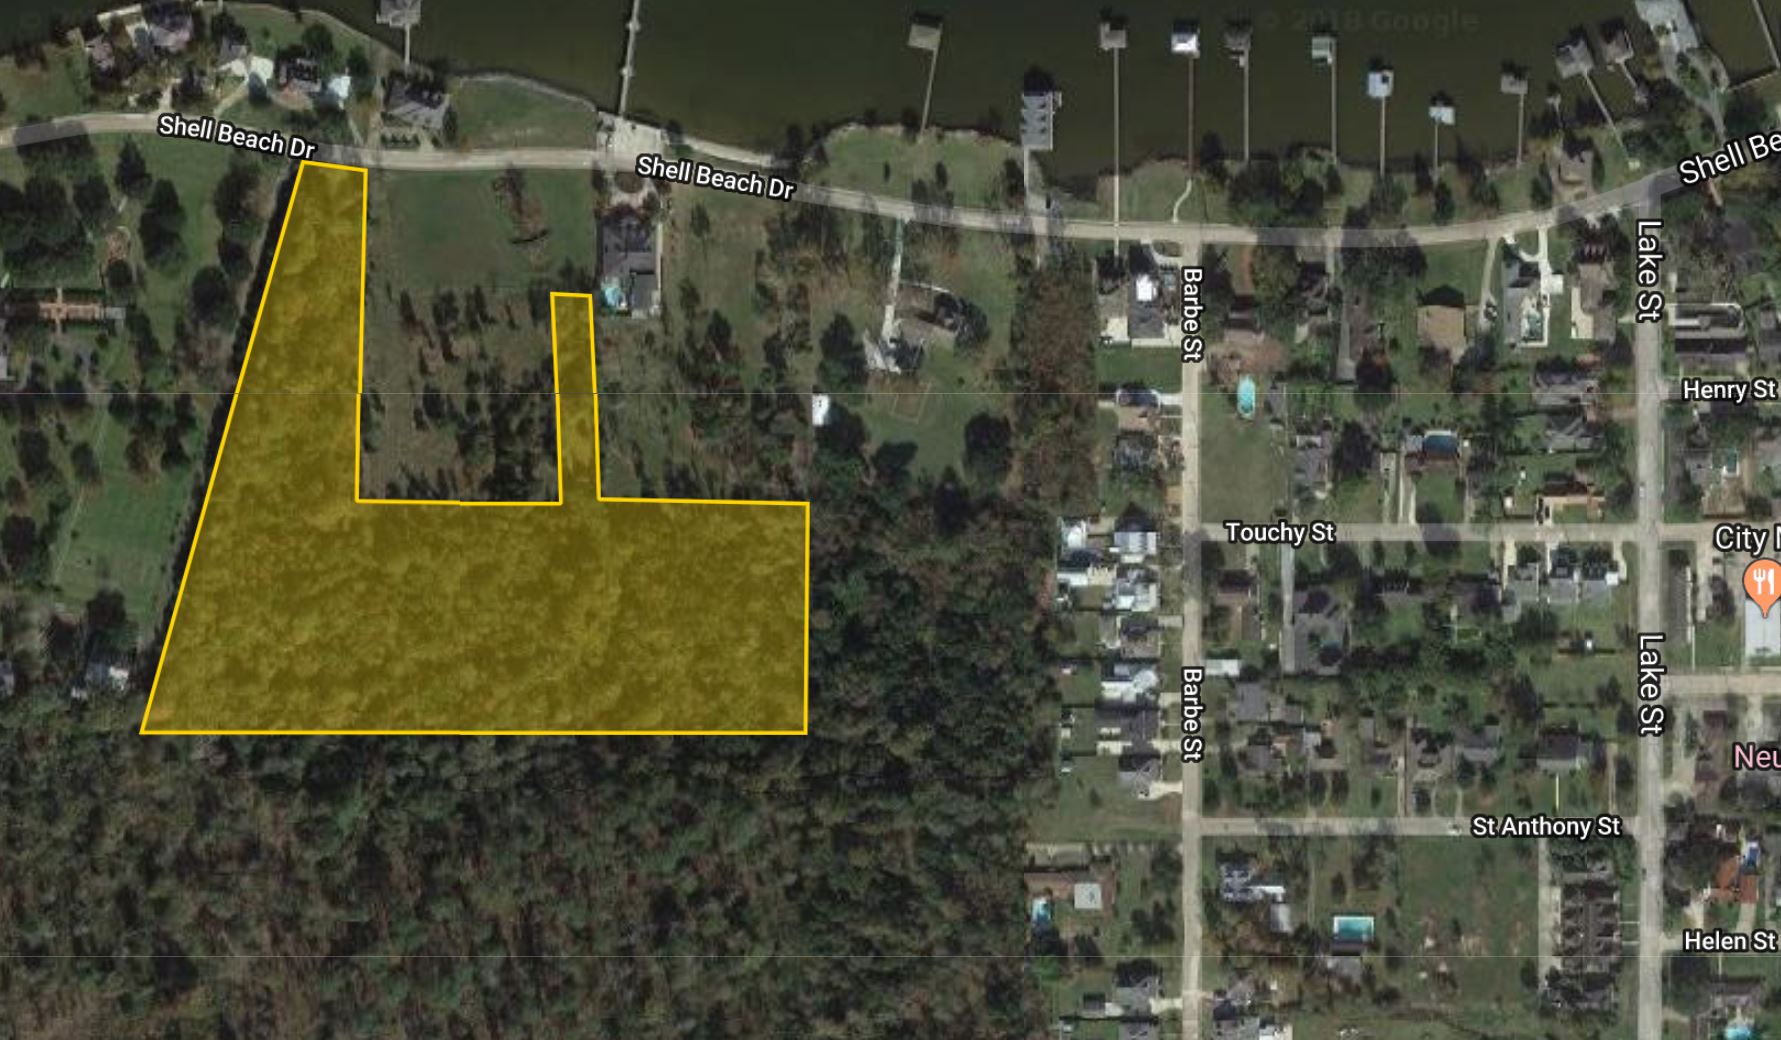 10 Acres available off Shell Beach Drive